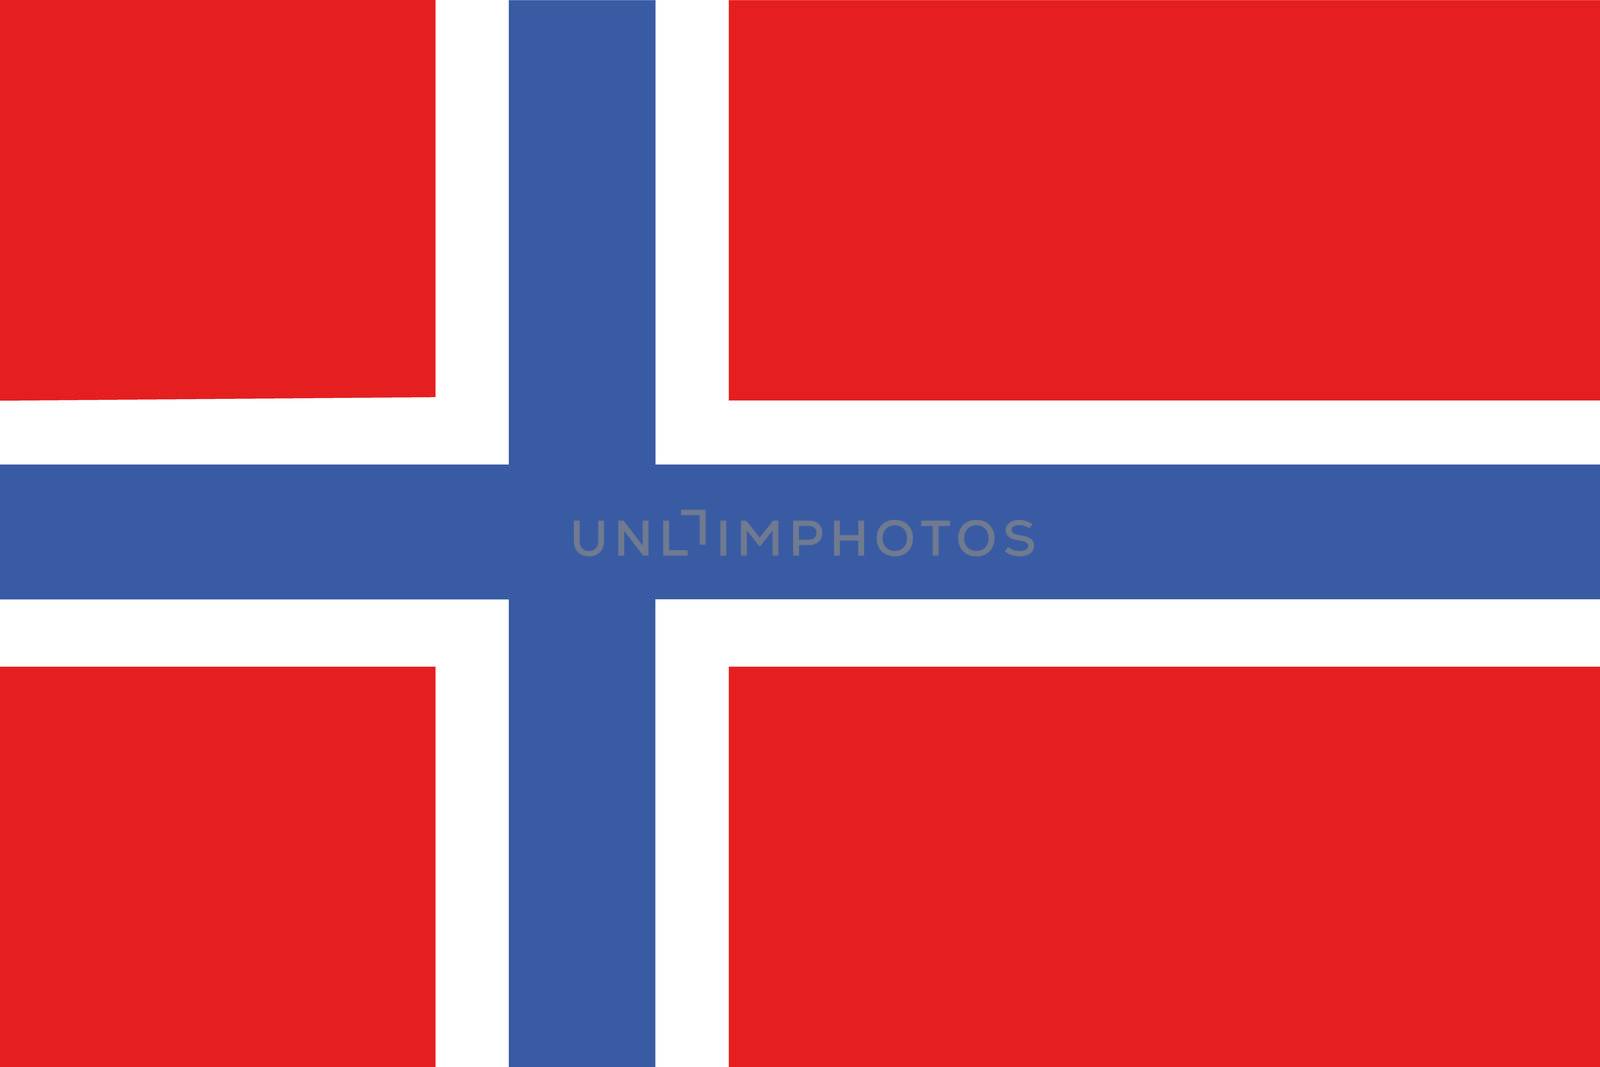 Illustrated Drawing of the flag of Norway by DragonEyeMedia